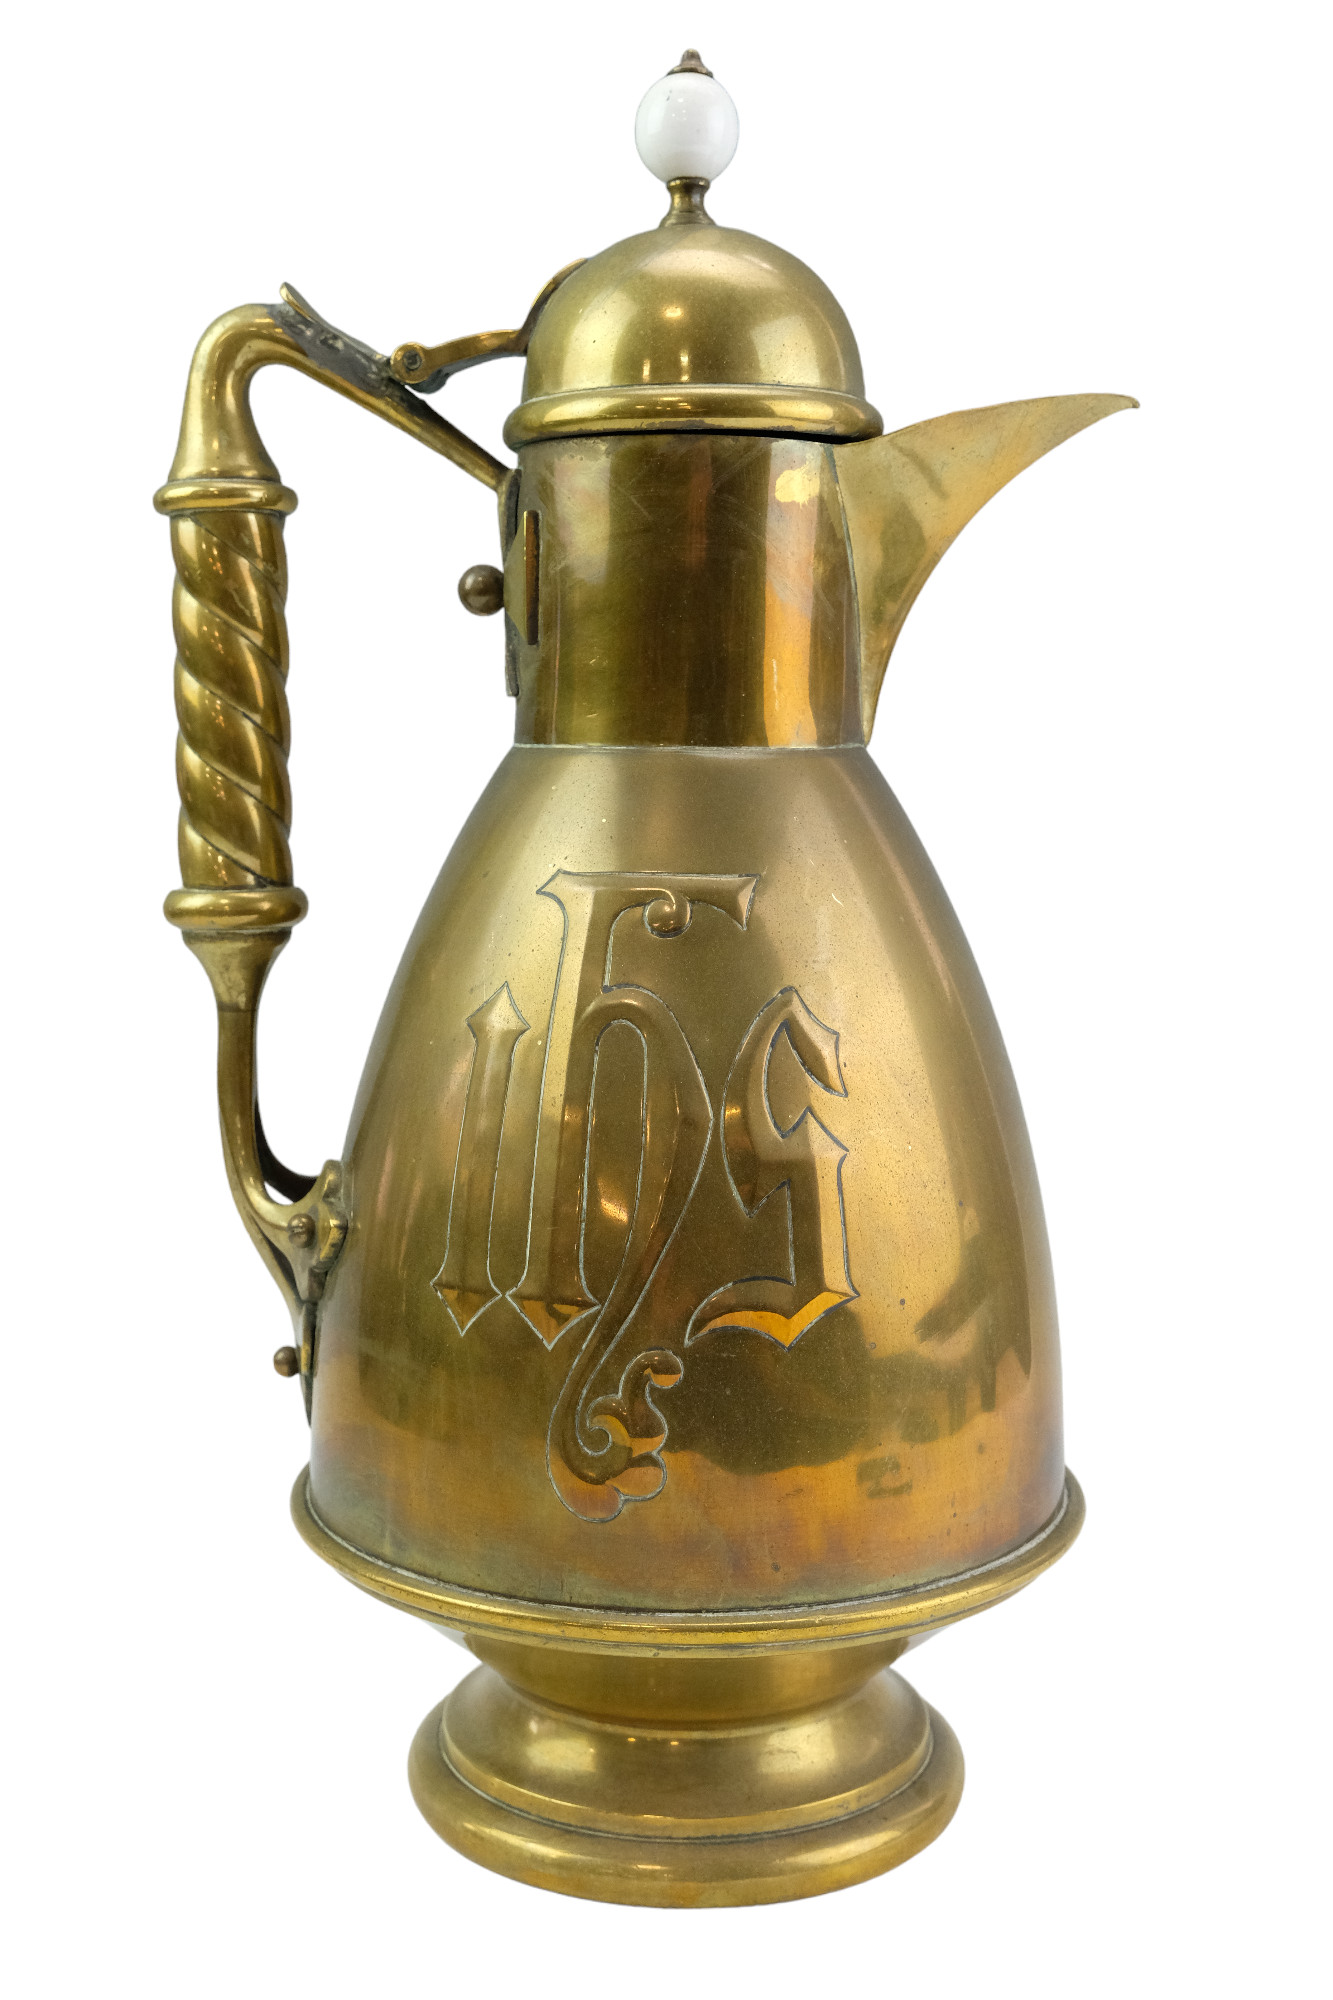 A large Gothic Revival Christian baptismal ewer, in brass with a white earthenware finial, late 19th